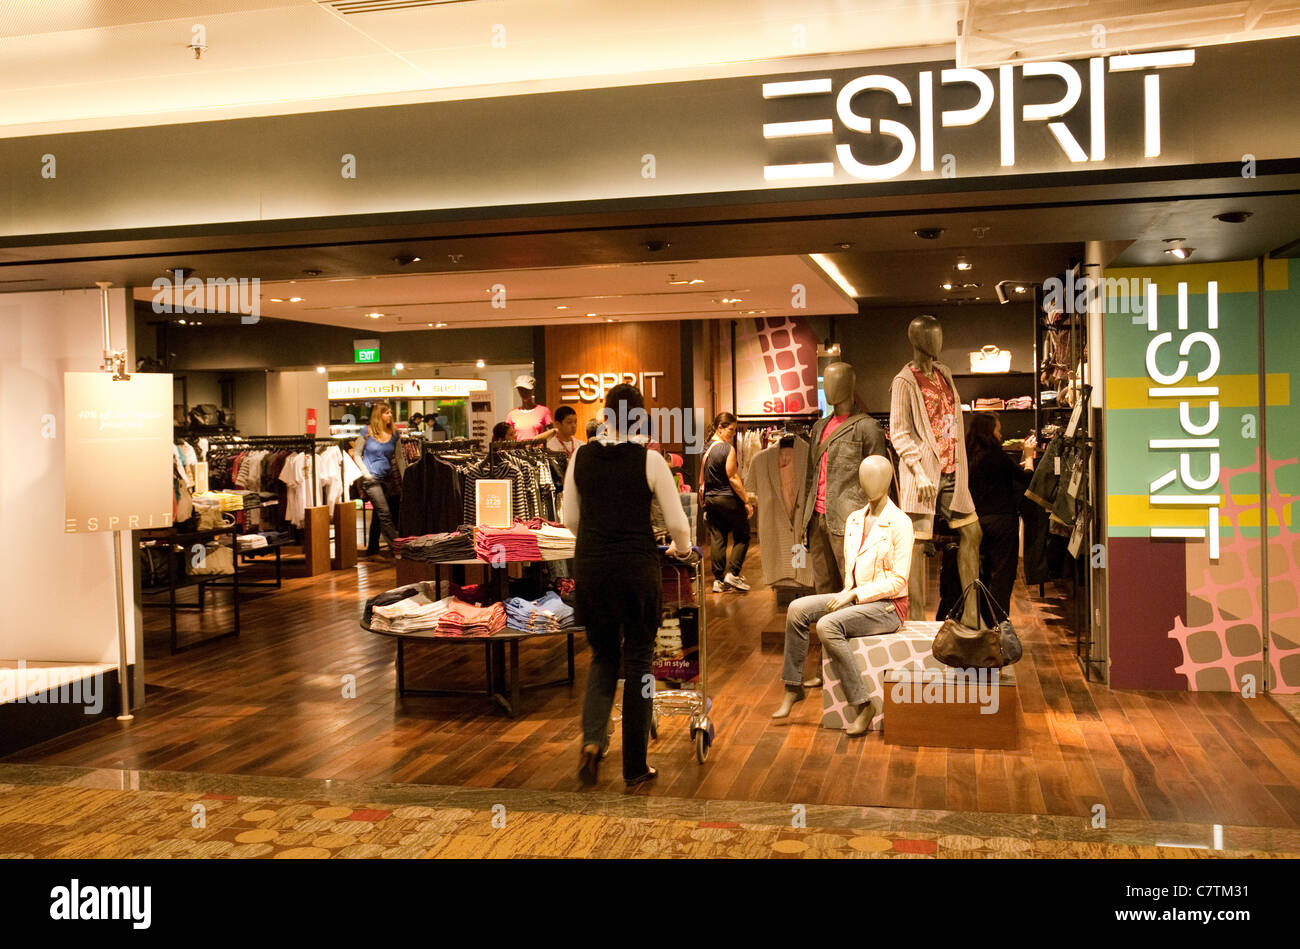 People shopping at the esprit fashion store, Changi airport Singapore Stock  Photo - Alamy